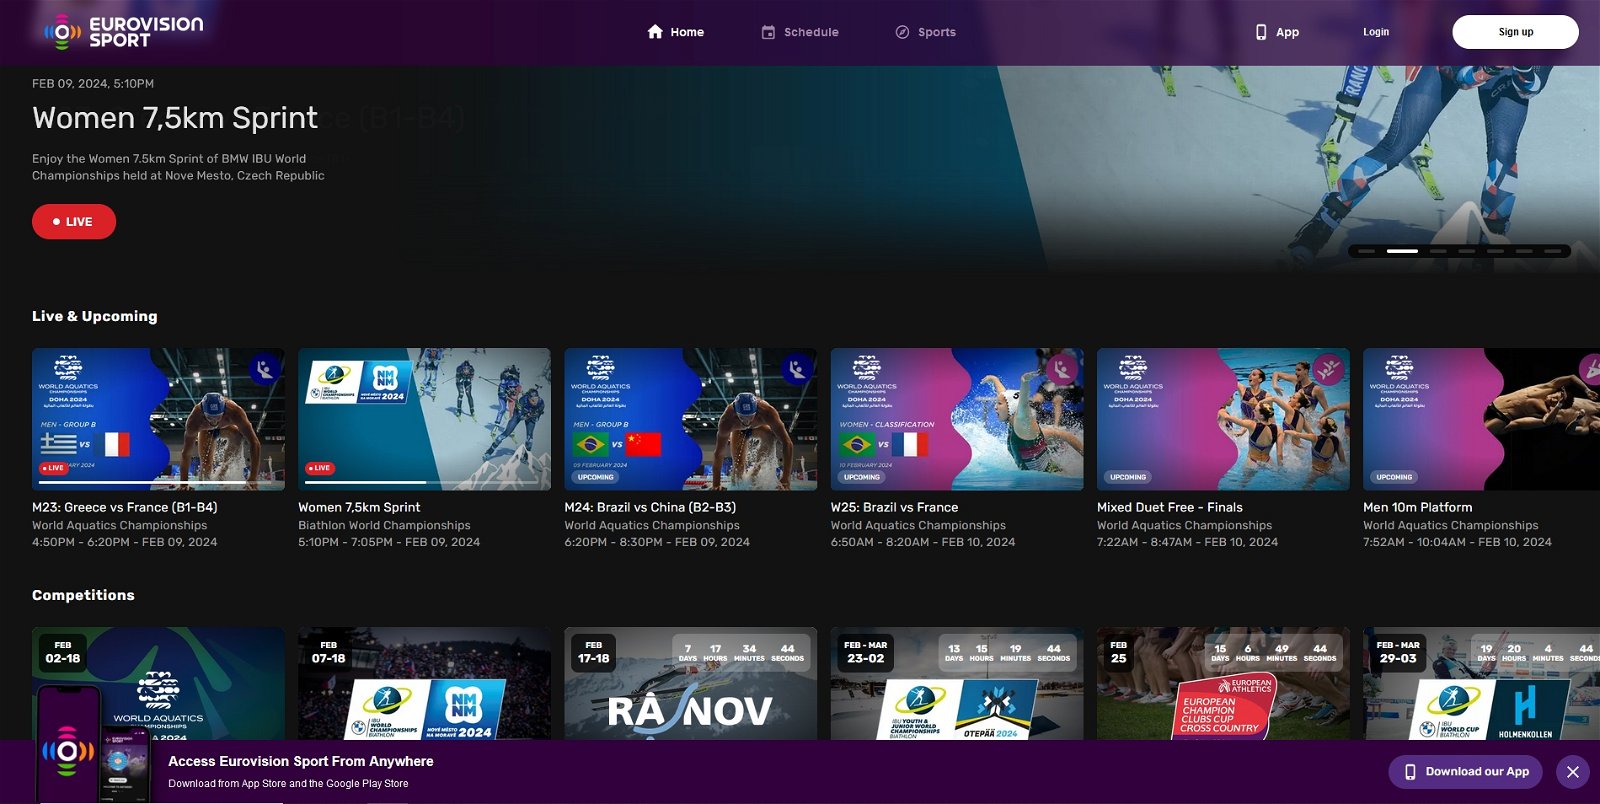 A new sports streaming platform arrives for free in Spain: this is Eurovision Sport